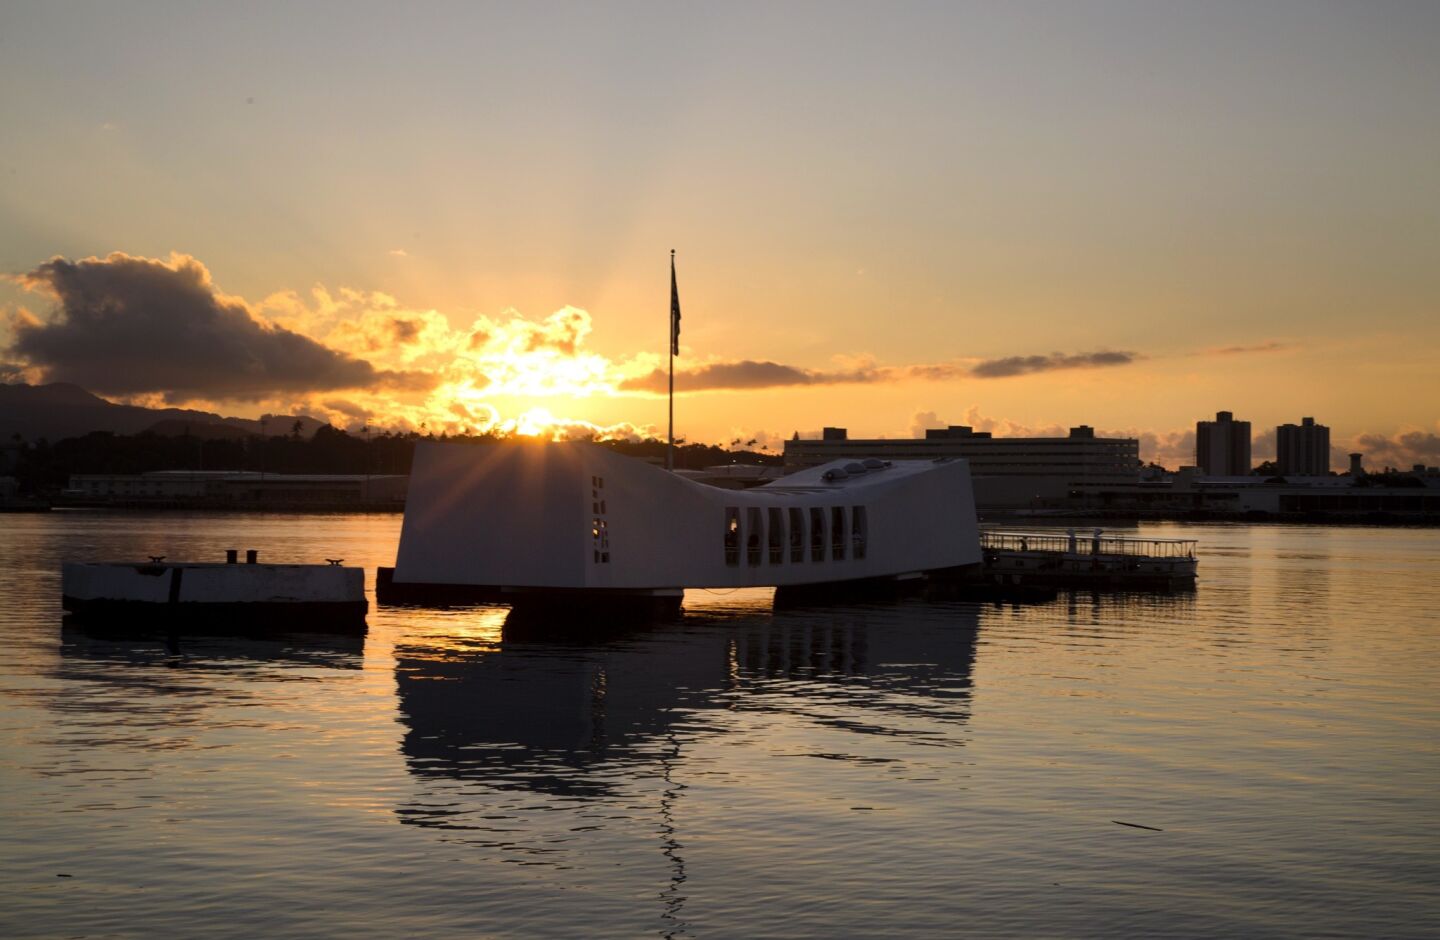 The sun rises behind the battleship USS Arizona Memorial at Pearl Harbor, Hawaii, as commemorations continue leading up to Wednesday, and the 75th anniversary of the Japanese attack on Pearl Harbor, December 7, 1941, thrusting The United States into World War II.